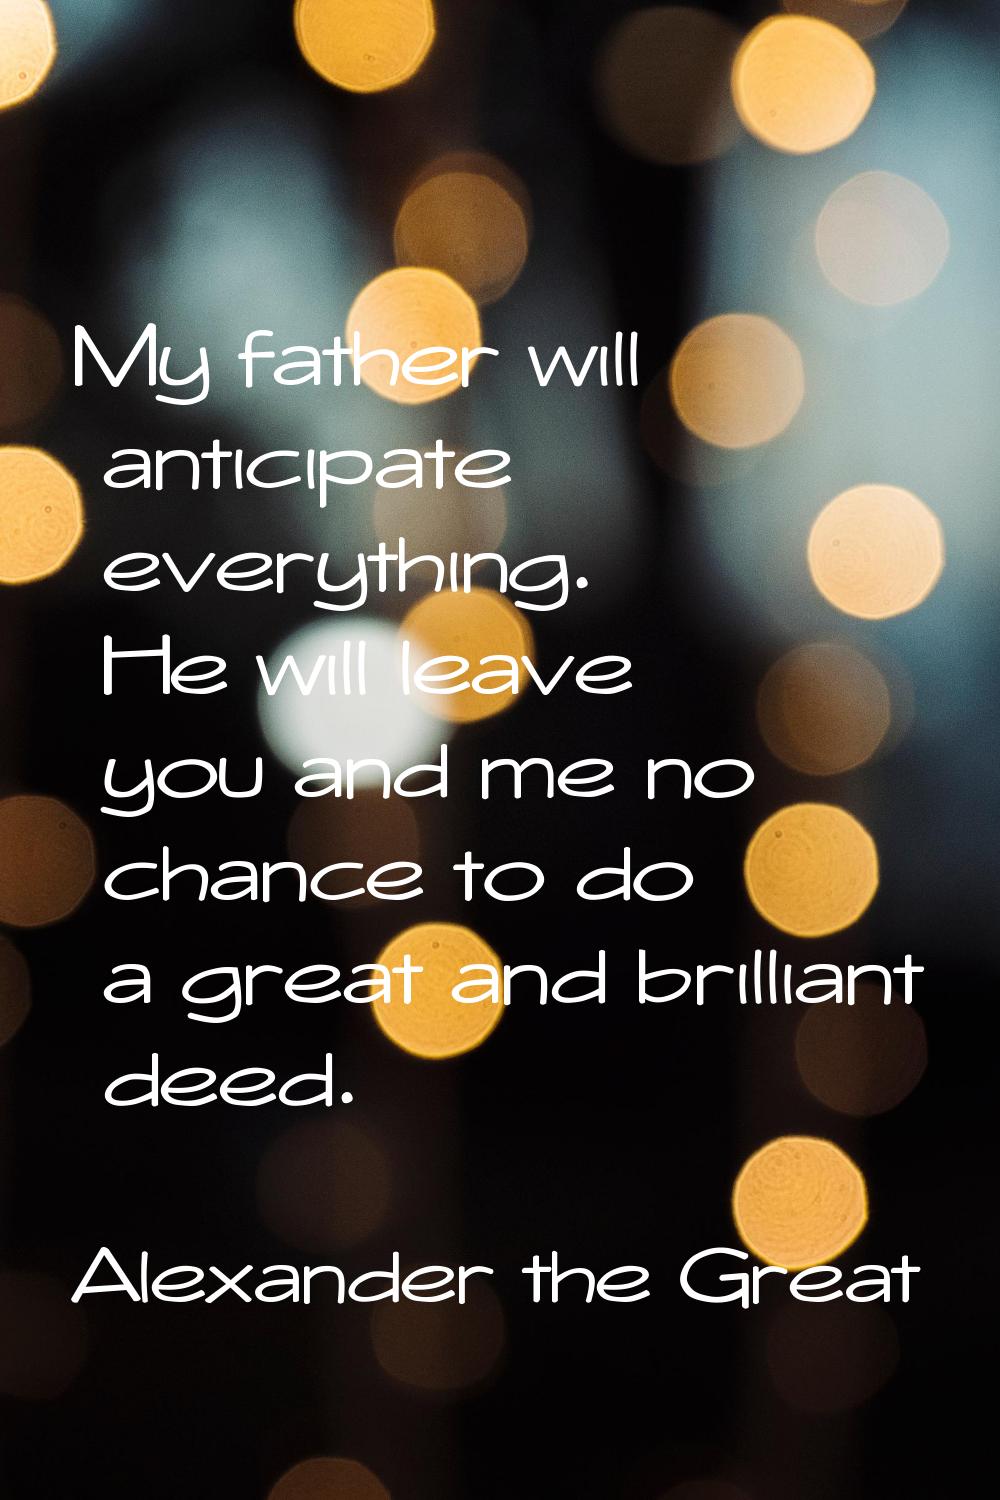 My father will anticipate everything. He will leave you and me no chance to do a great and brillian